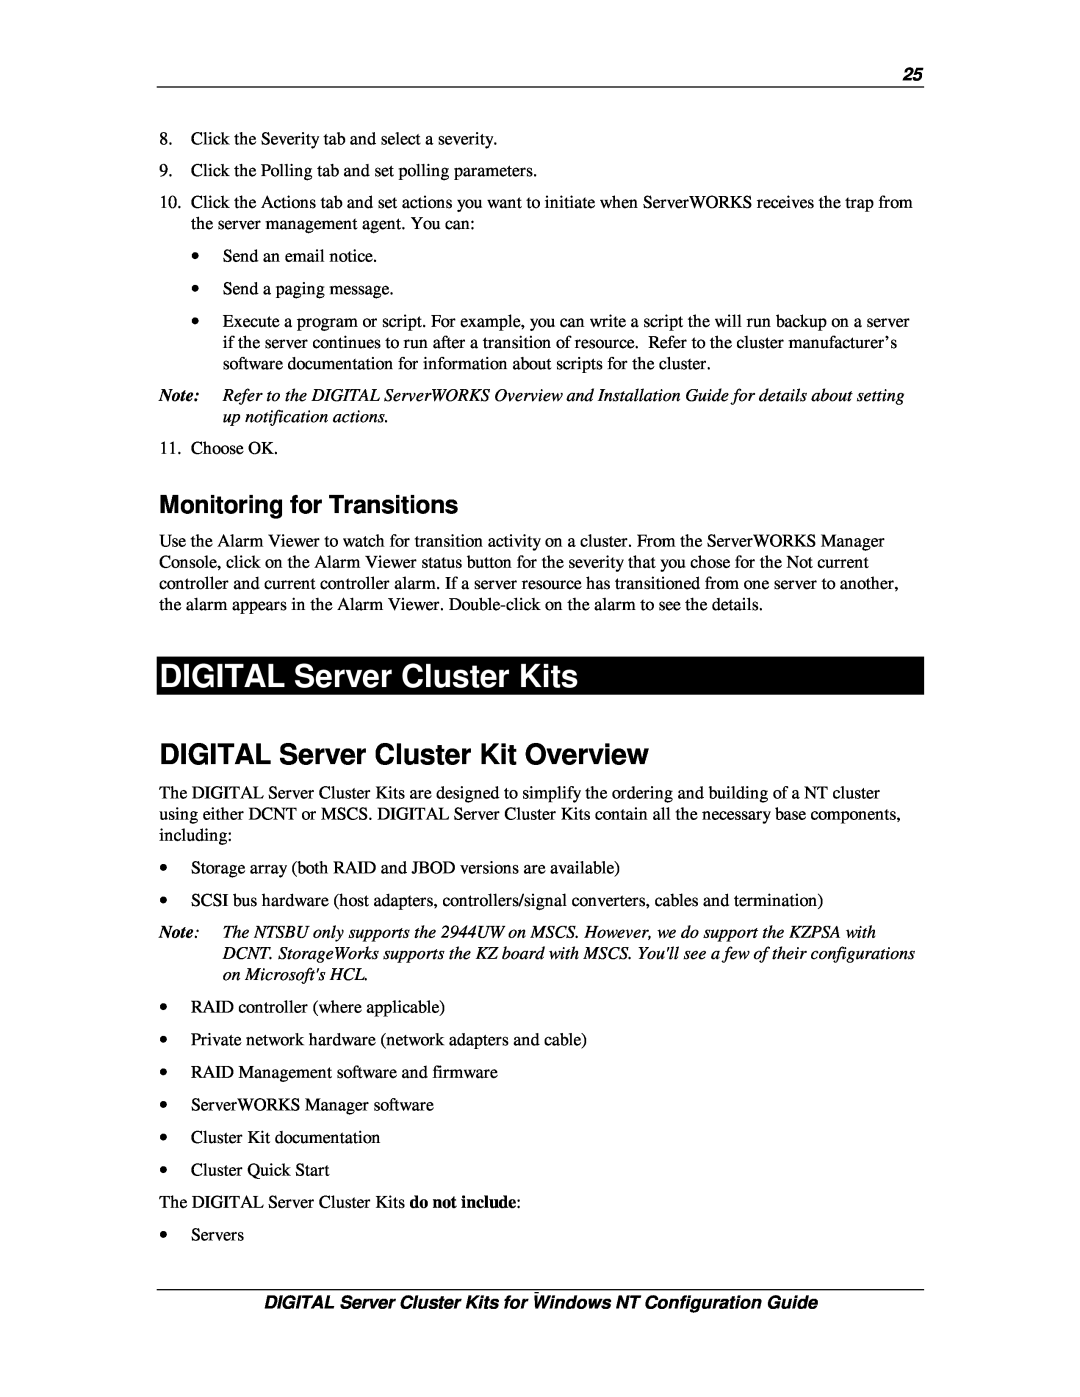 Compaq DIGITAL Server Cluster Kits for Windows NT manual DIGITAL Server Cluster Kit Overview, Monitoring for Transitions 